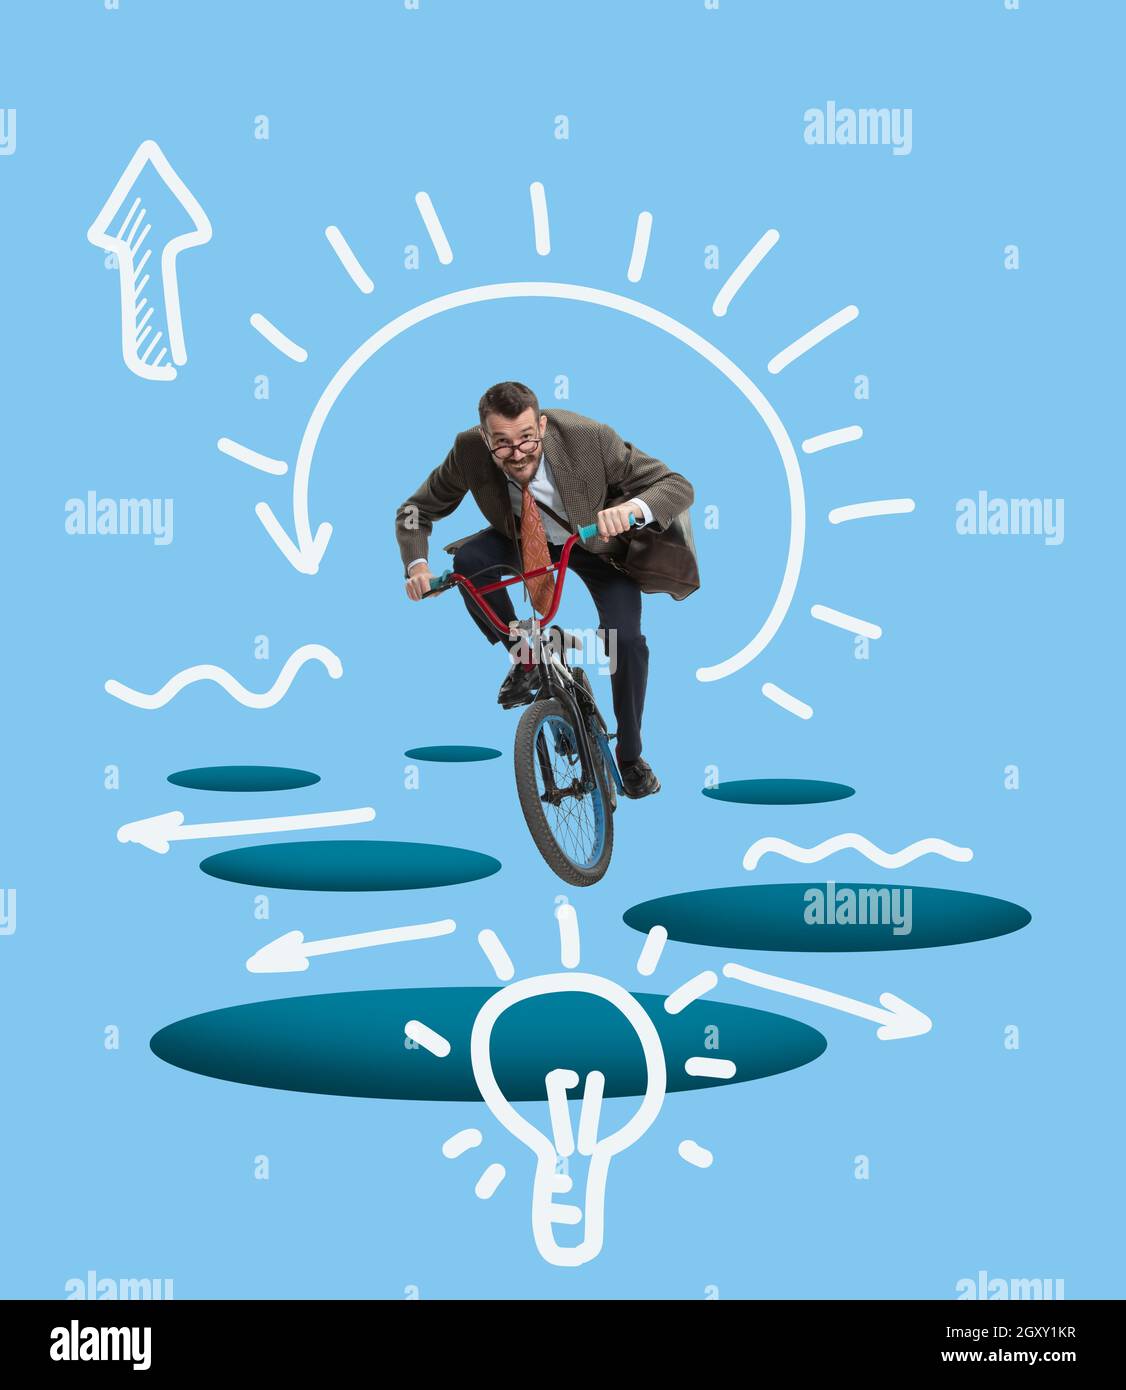 Contemporary art collage. Business concept. Composition with young man riding on bike and generate new business ideas. Stock Photo